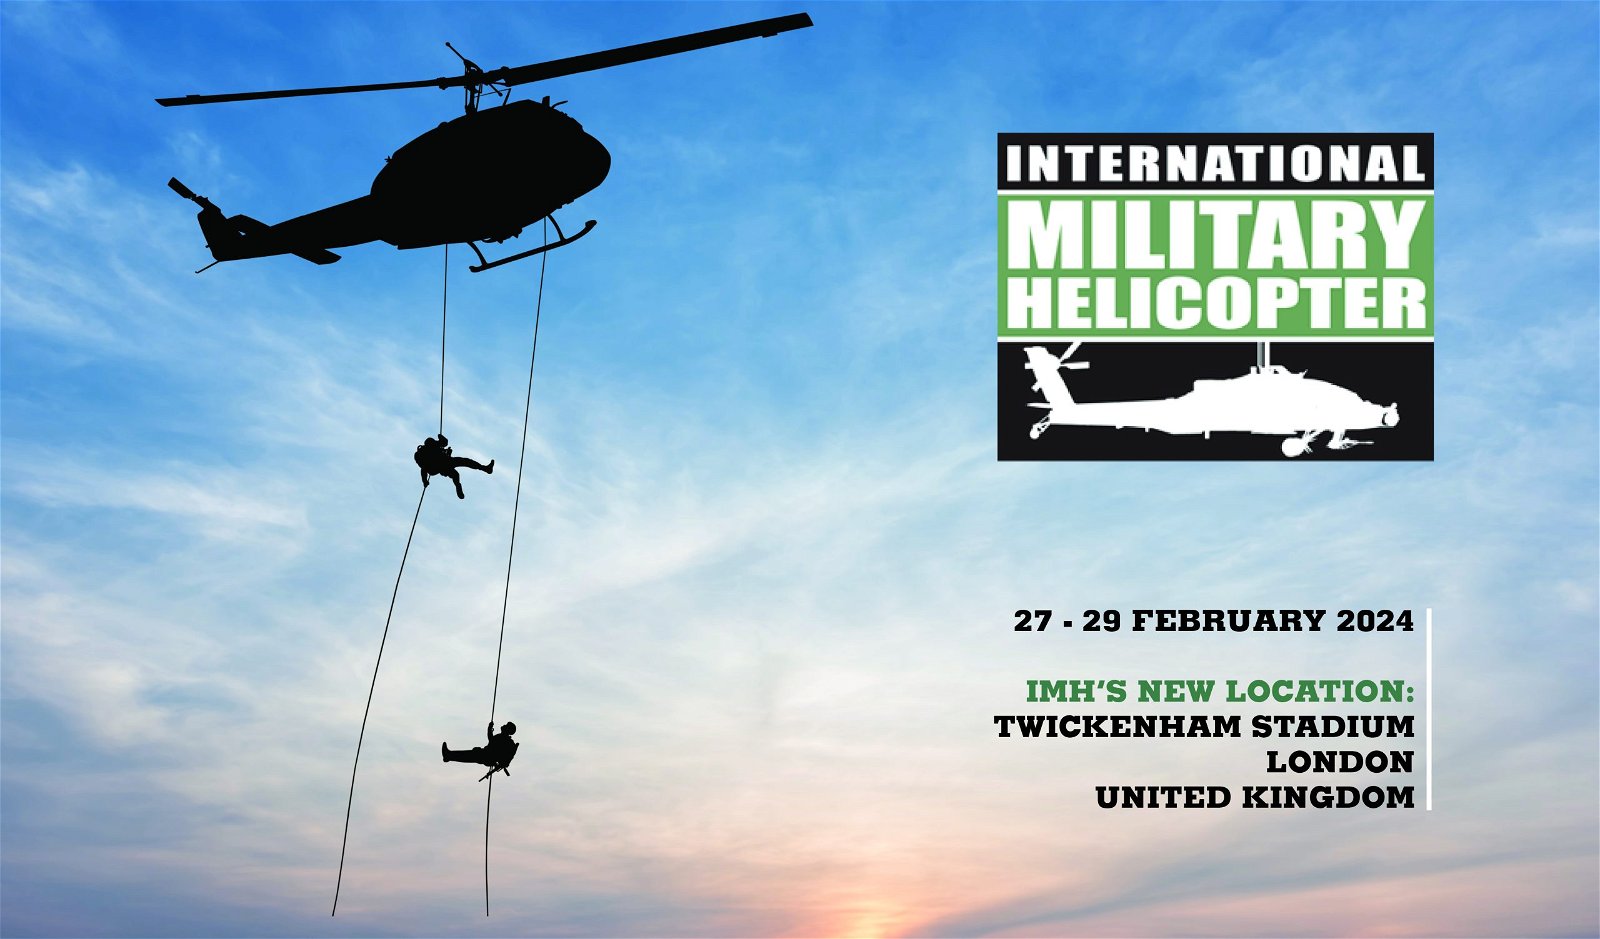 MILITARY HELICOPTER CONFERENCE scaled